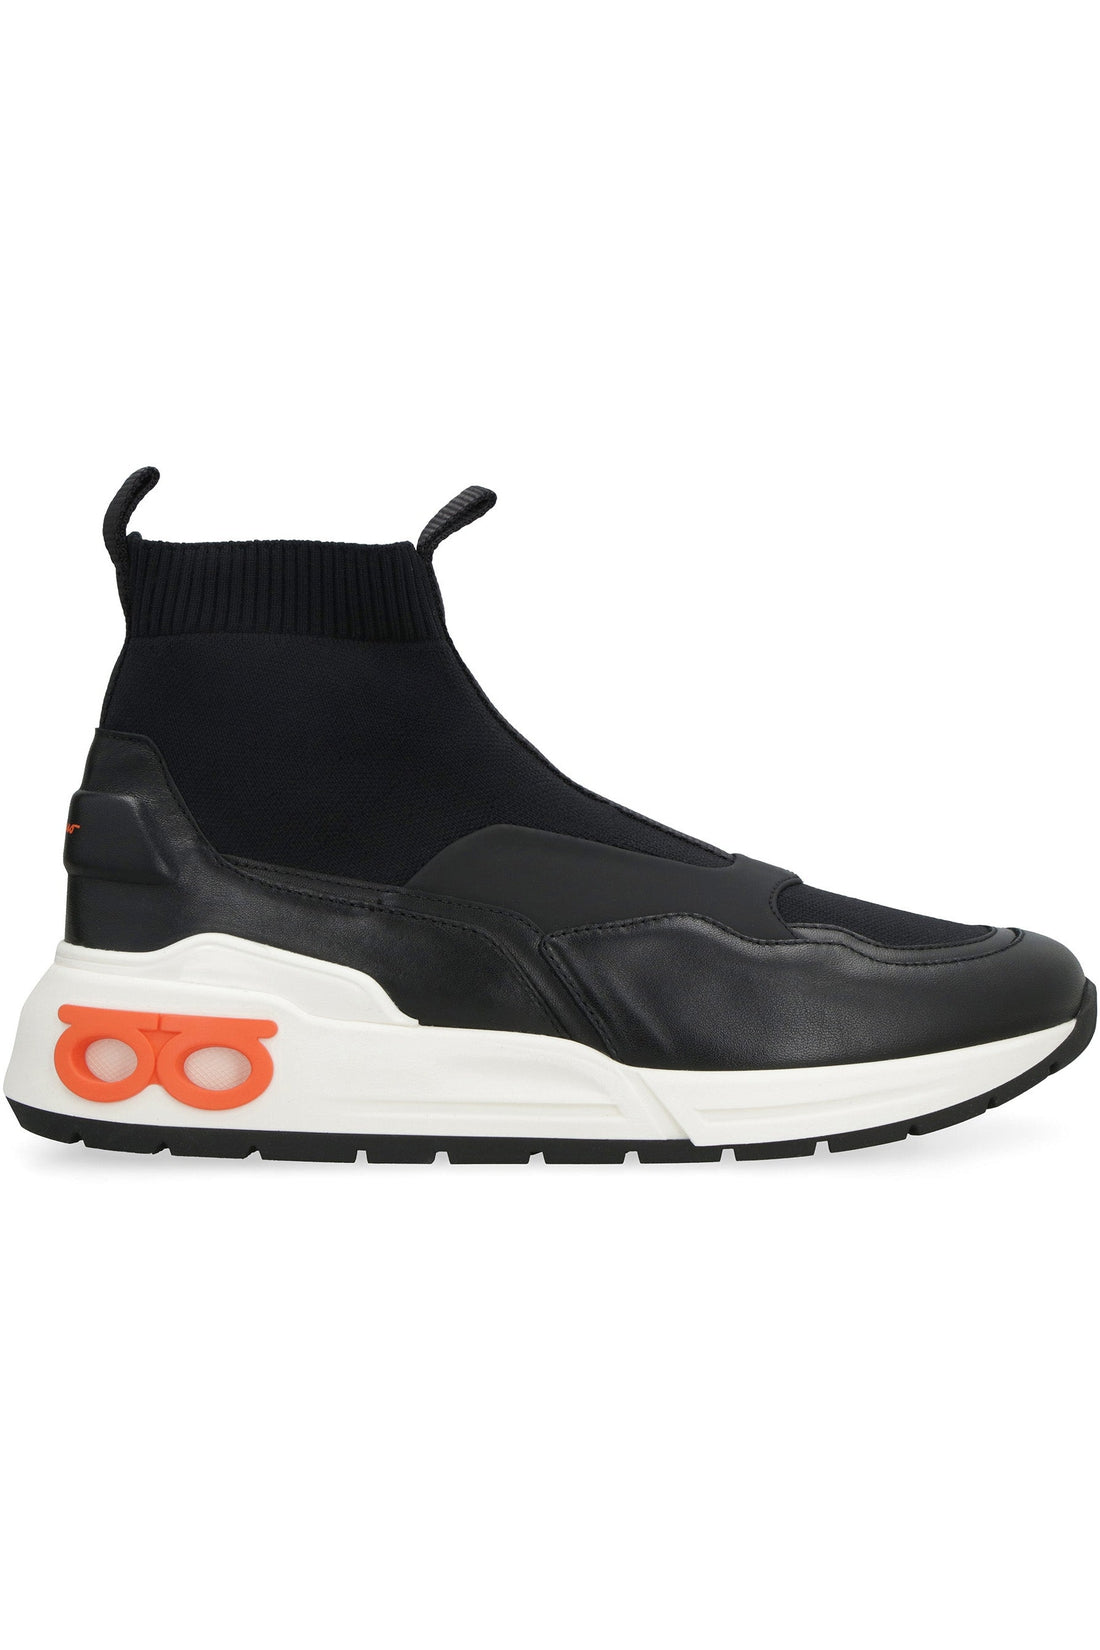 FERRAGAMO-OUTLET-SALE-Knitted sock-style sneakers-ARCHIVIST